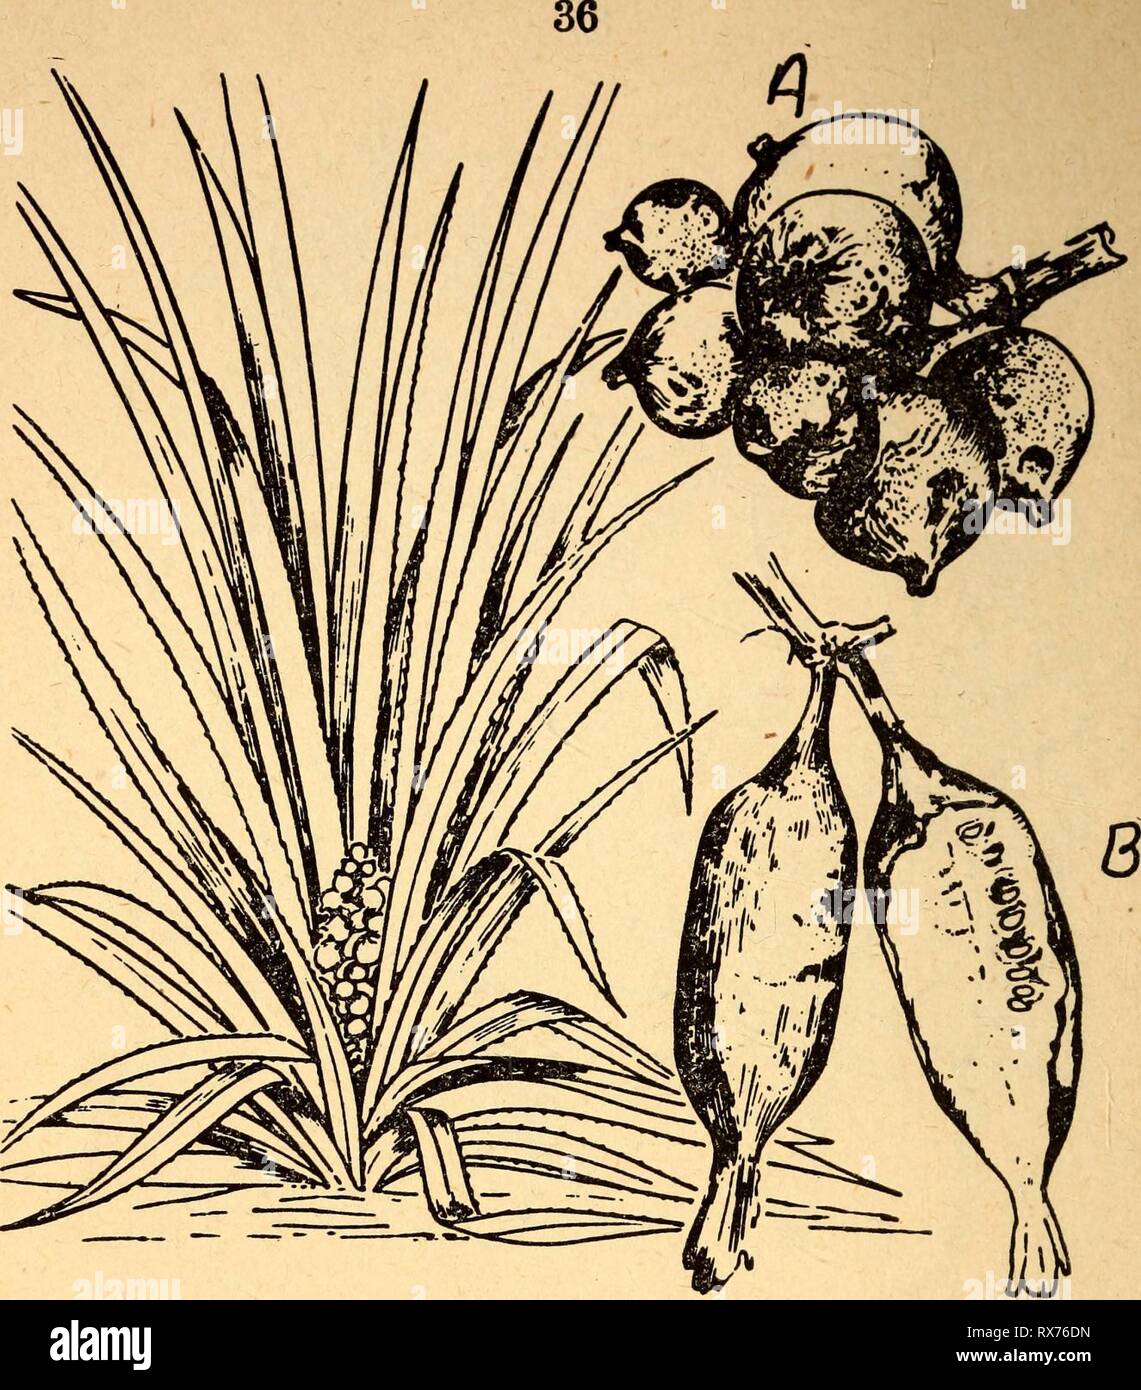 Edible and poisonous plants of Edible and poisonous plants of the Caribbean region ediblepoisonousp00dahl Year: 1944  27. A—PlNGWING Bromelia Pinguin B—PlRO Bromelia Karatas The sour pingwing may be eaten raw or cooked. It is used to prepare a tart beverage similar to lemonade. The very young, tender leaves or sprouts or the center of the plant may be cooked as greens. Pingwing is a common wild plant of the Caribbean lowlands, growing abundantly in thickets and hedges. This fruit is similar to the cultivated pineapple; its leaves are spiny and the ripe fruits are yellow or red. Other names for Stock Photo